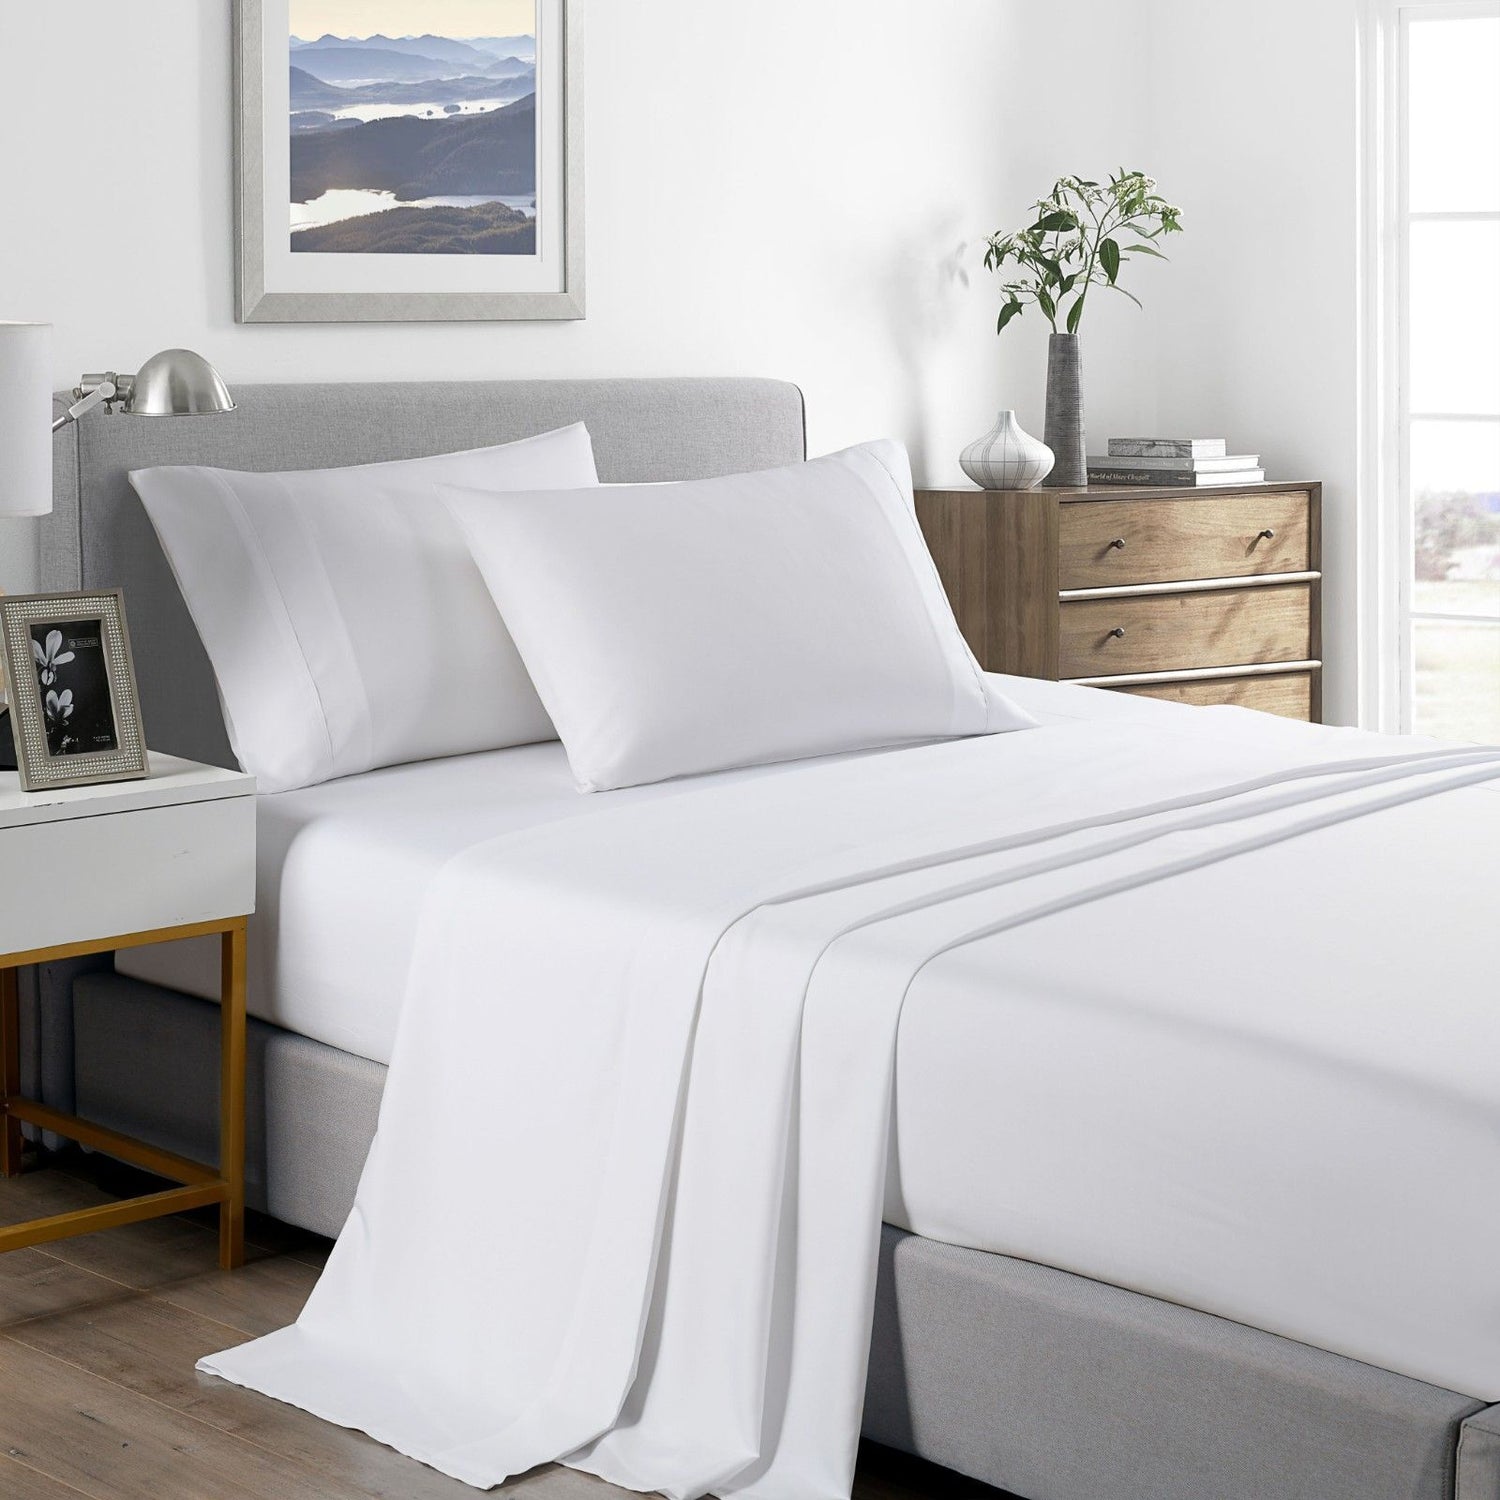 Royal Comfort 2000 Thread Count Original Bamboo Blend White Sheet Set 10 Pack-Bed Linen-PEROZ Accessories